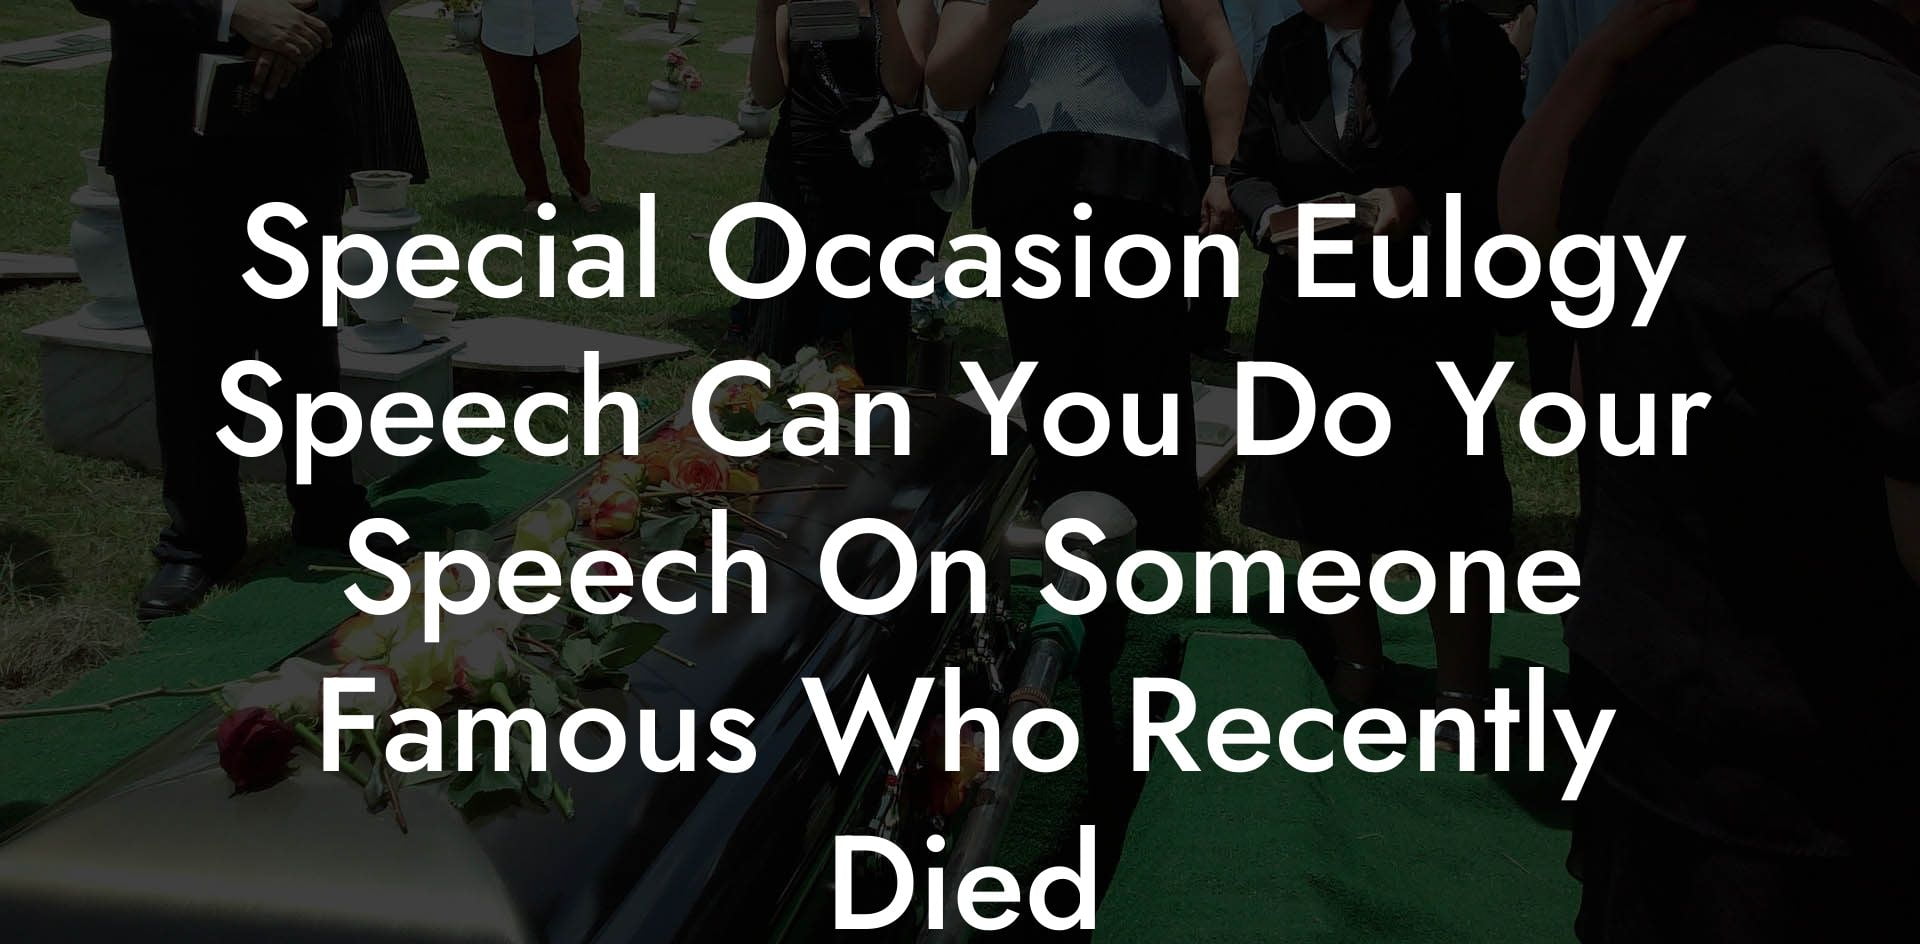 Special Occasion Eulogy Speech Can You Do Your Speech On Someone Famous Who Recently Died